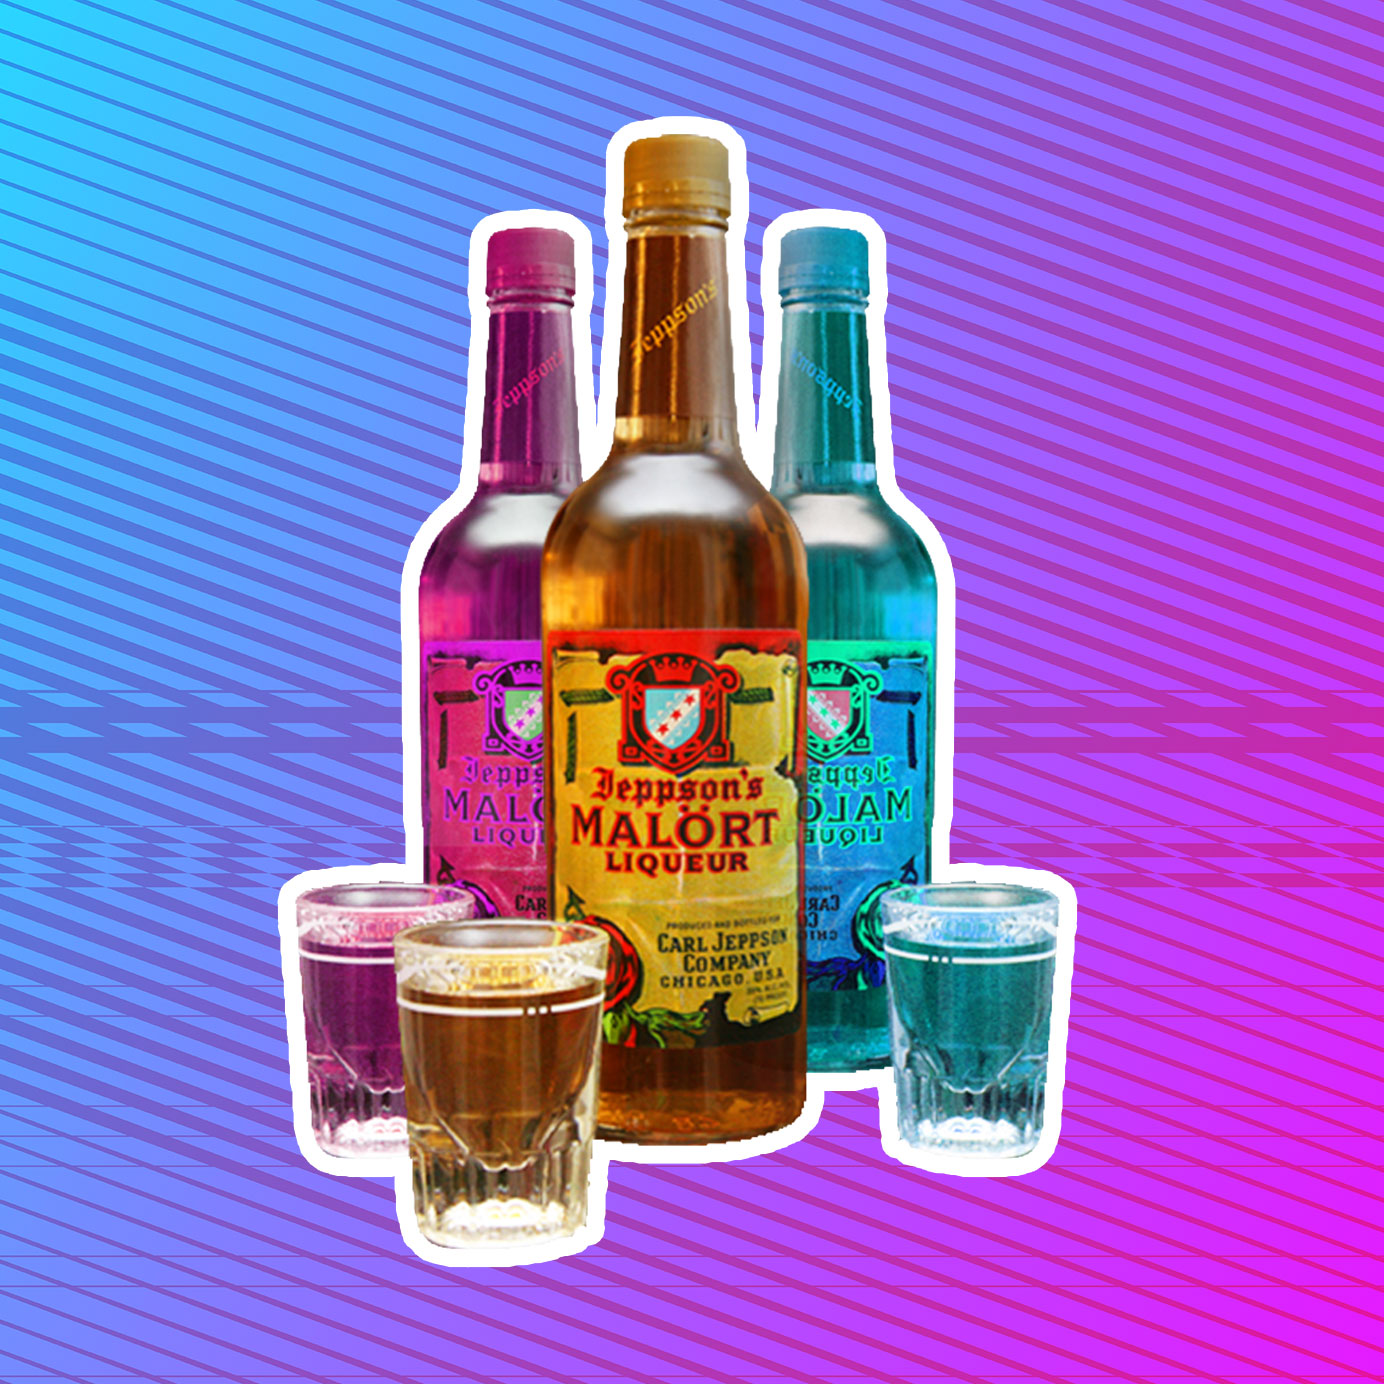 Why is Malort popular in Chicago